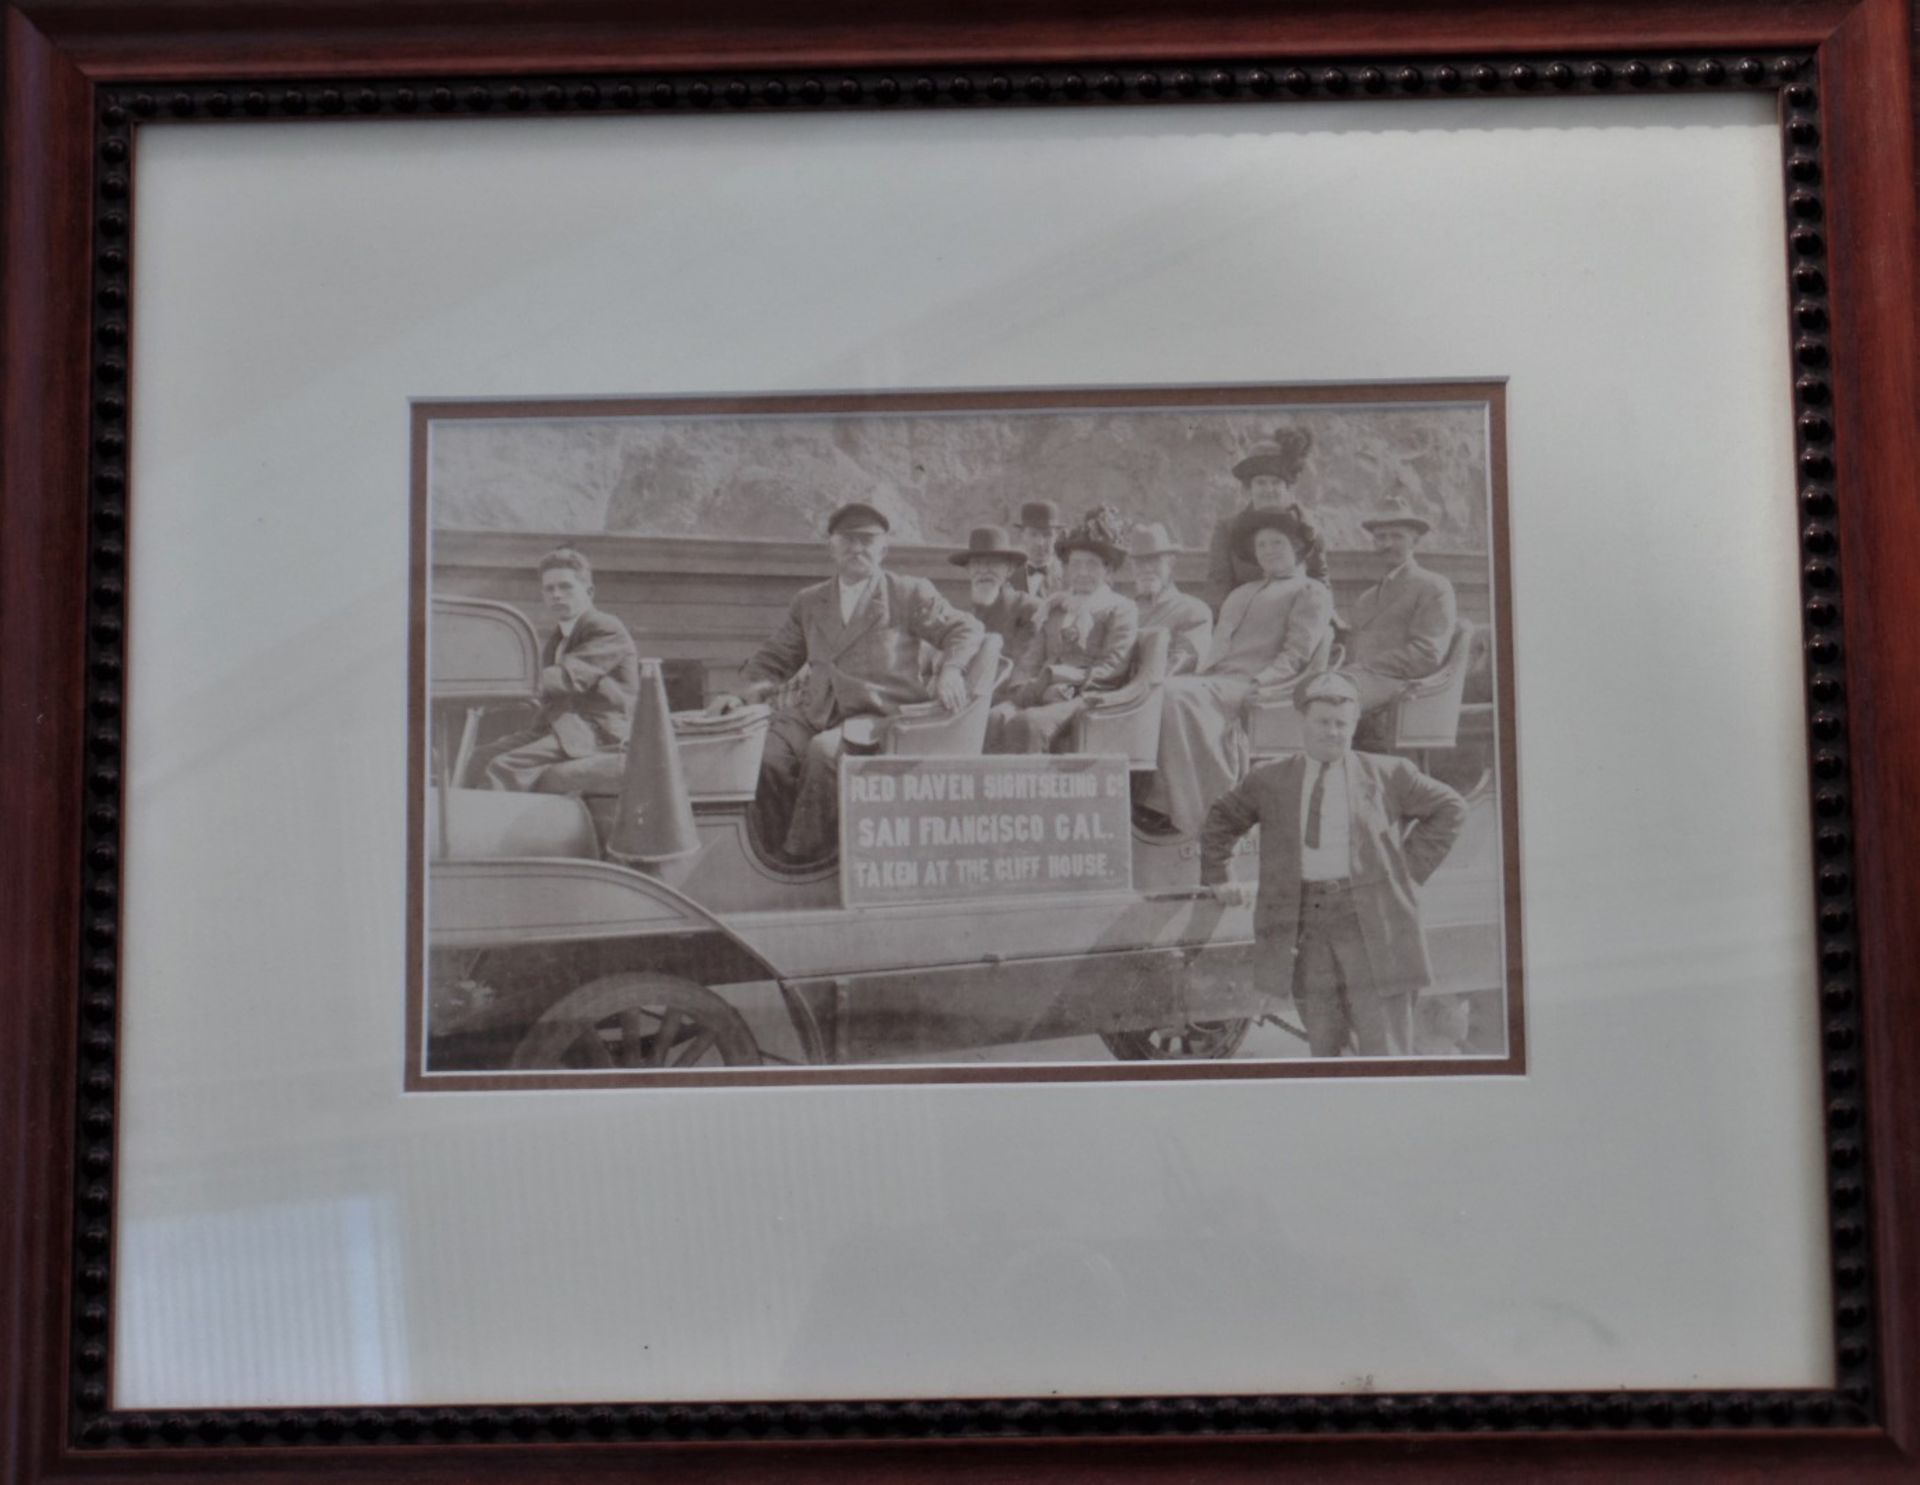 Framed Photos - Groups of people in Cliff House Shuttles - Image 3 of 3